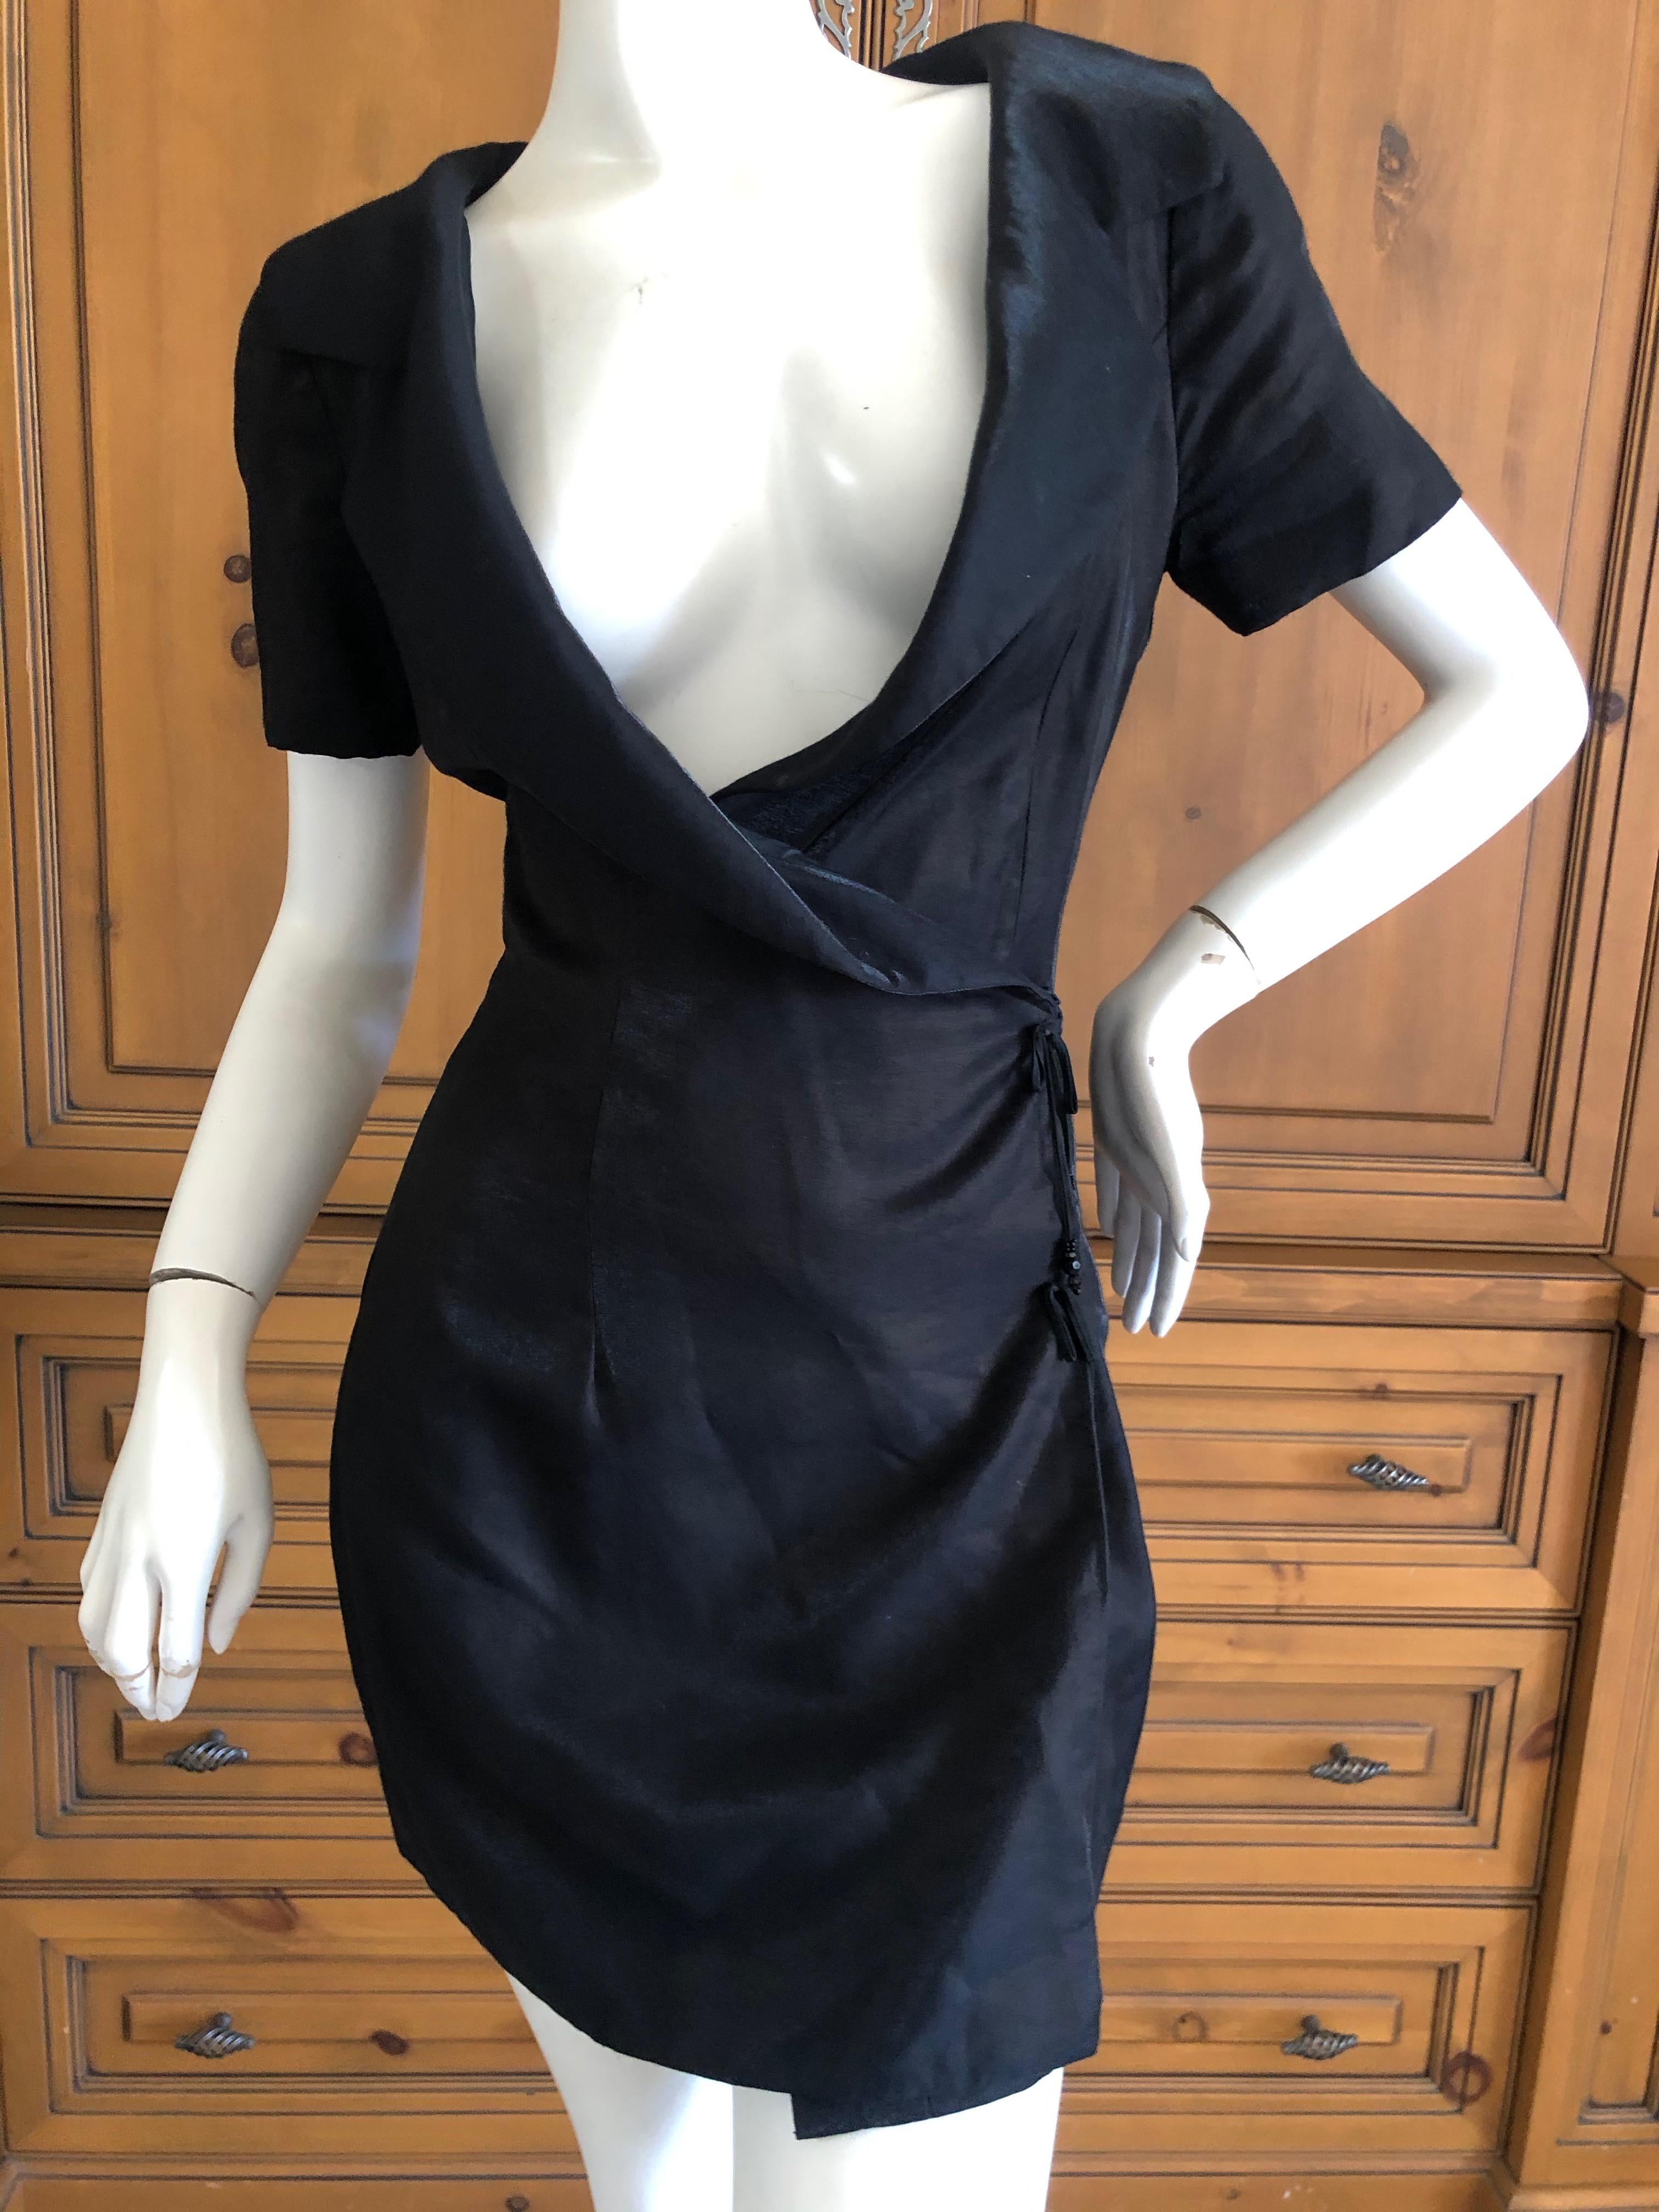 Christian Dior 1992 Numbered Demi Couture Corset Laced Dress by Gianfranco Ferre In Excellent Condition For Sale In Cloverdale, CA